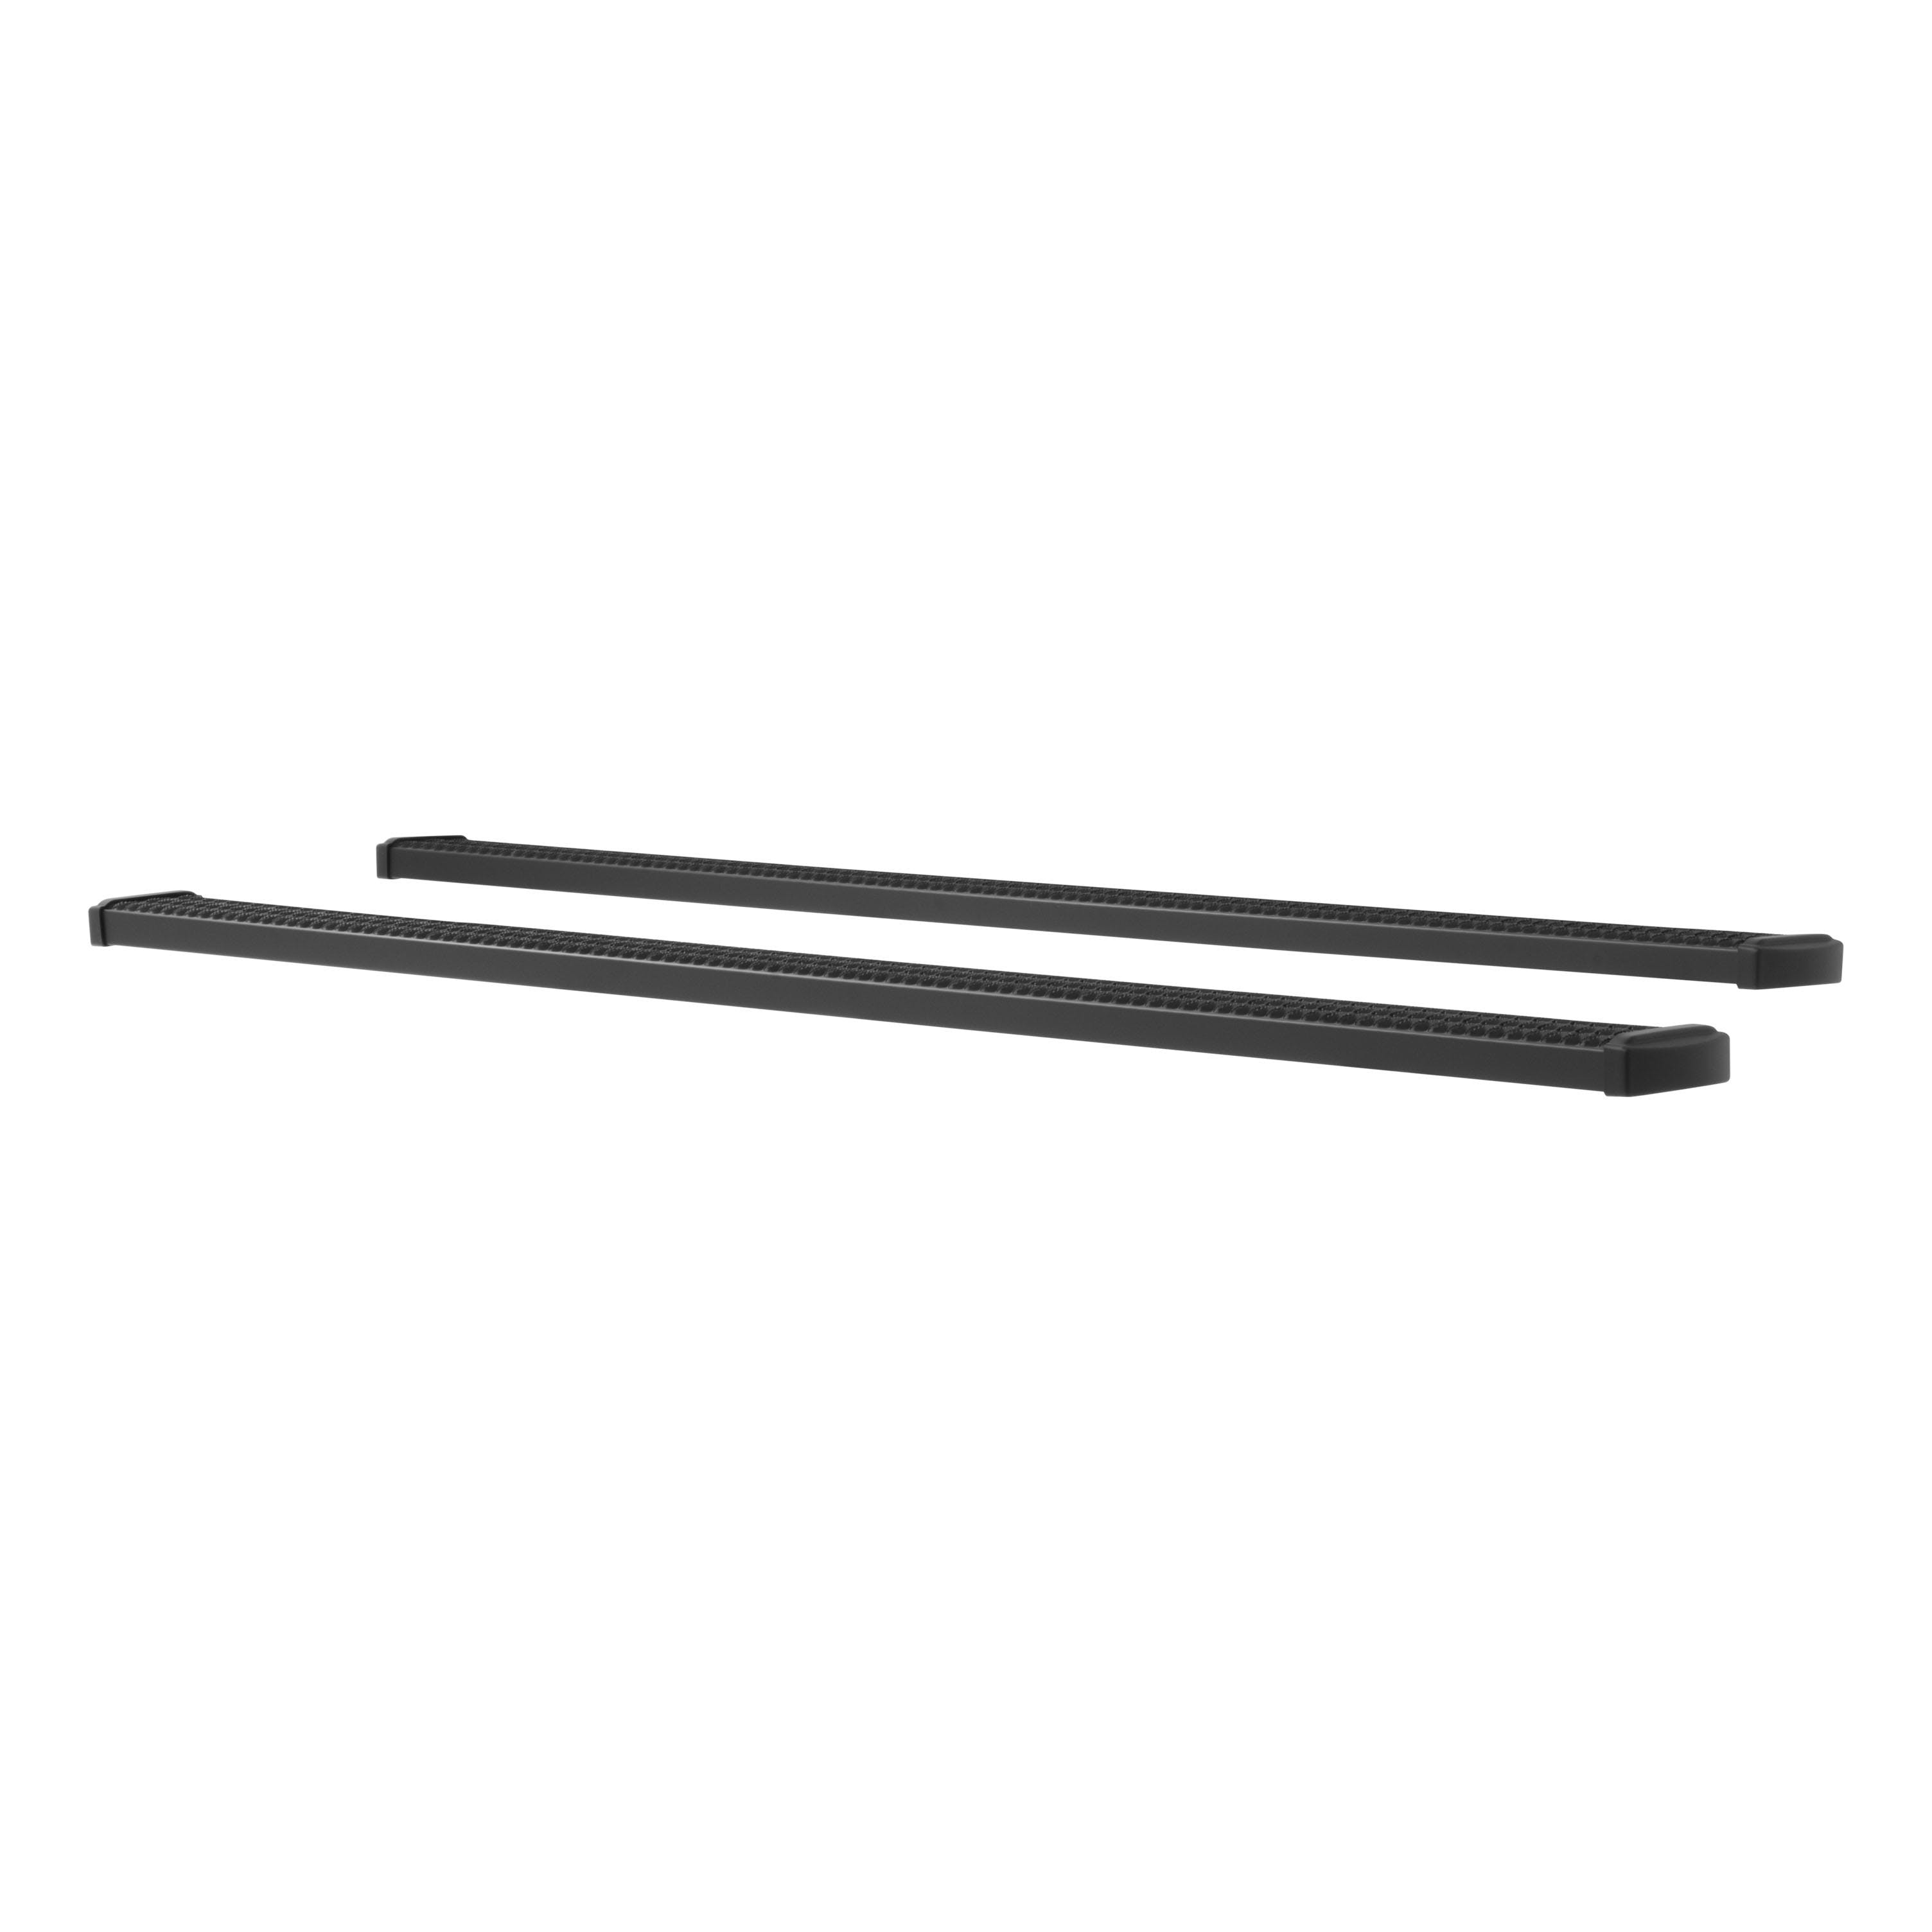 LUVERNE 415114-401339 Grip Step 7 inch Running Boards